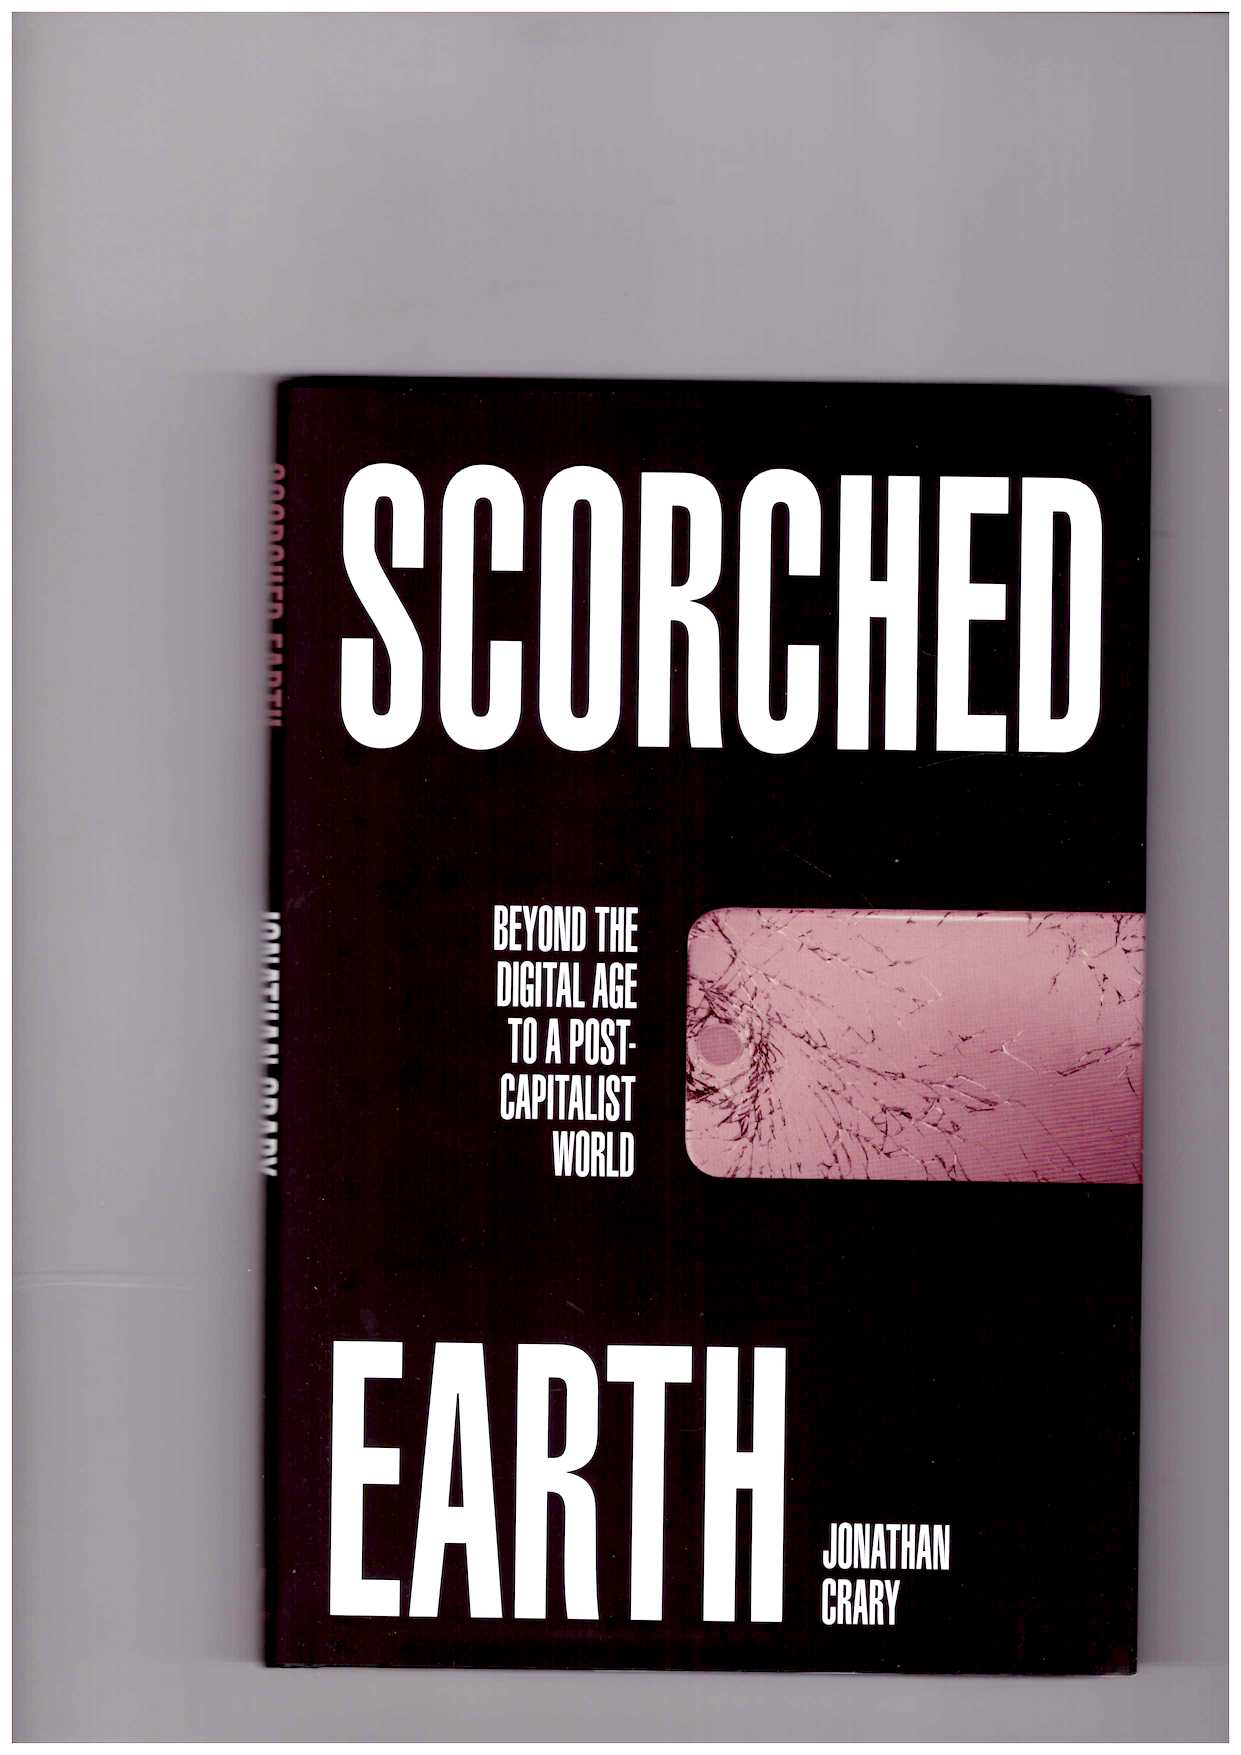 CRARY, Jonathan - Scorched Earth. Beyond the Digital Age to a Post-Capitalist World